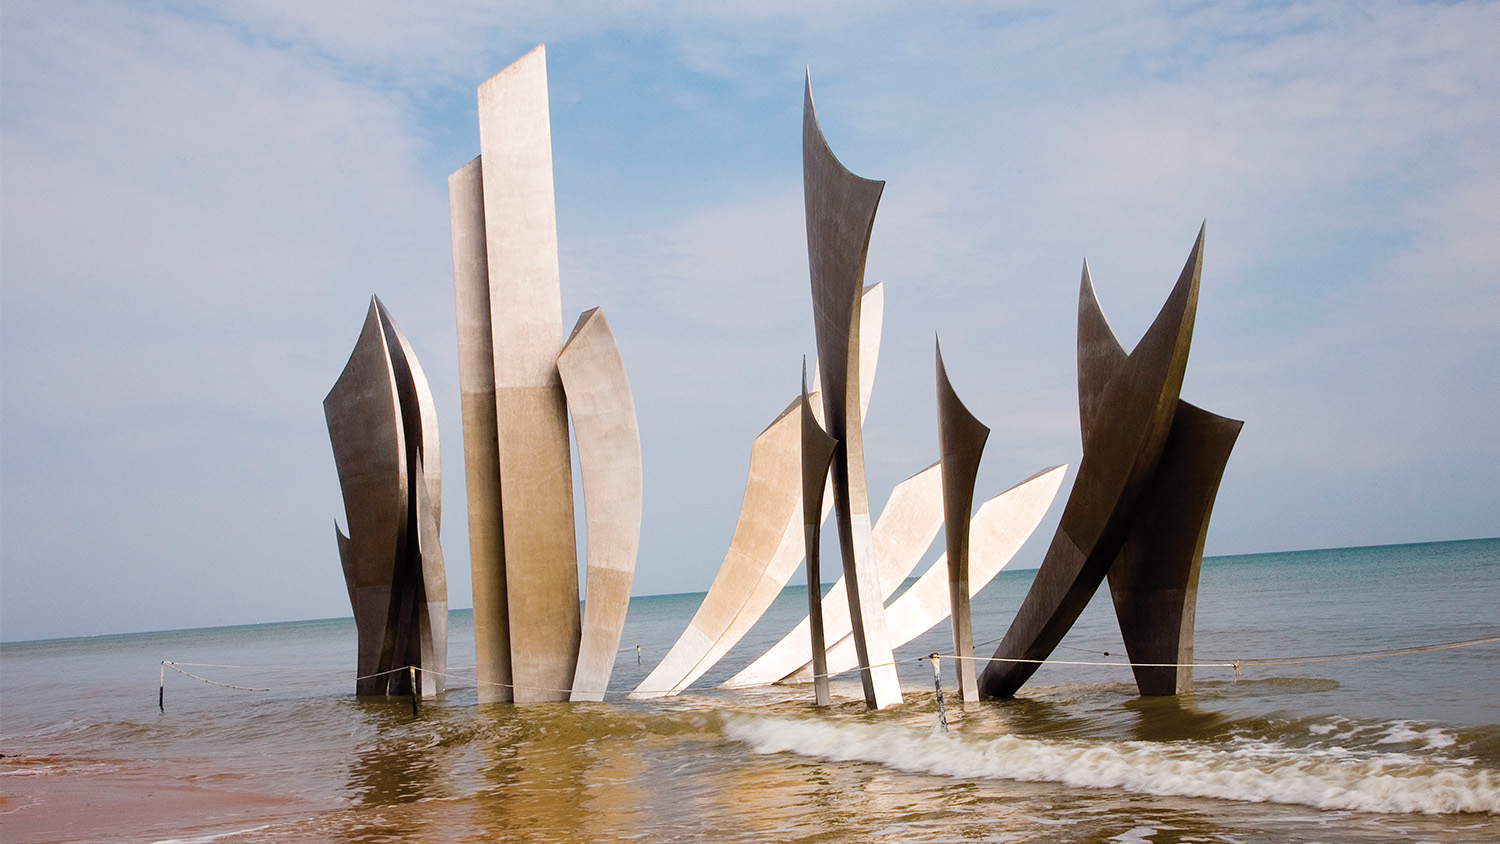 On Omaha Beach’s shore, waves come upon Les Braves, a monument commemorating Allied troops who landed on June 6, 1944.